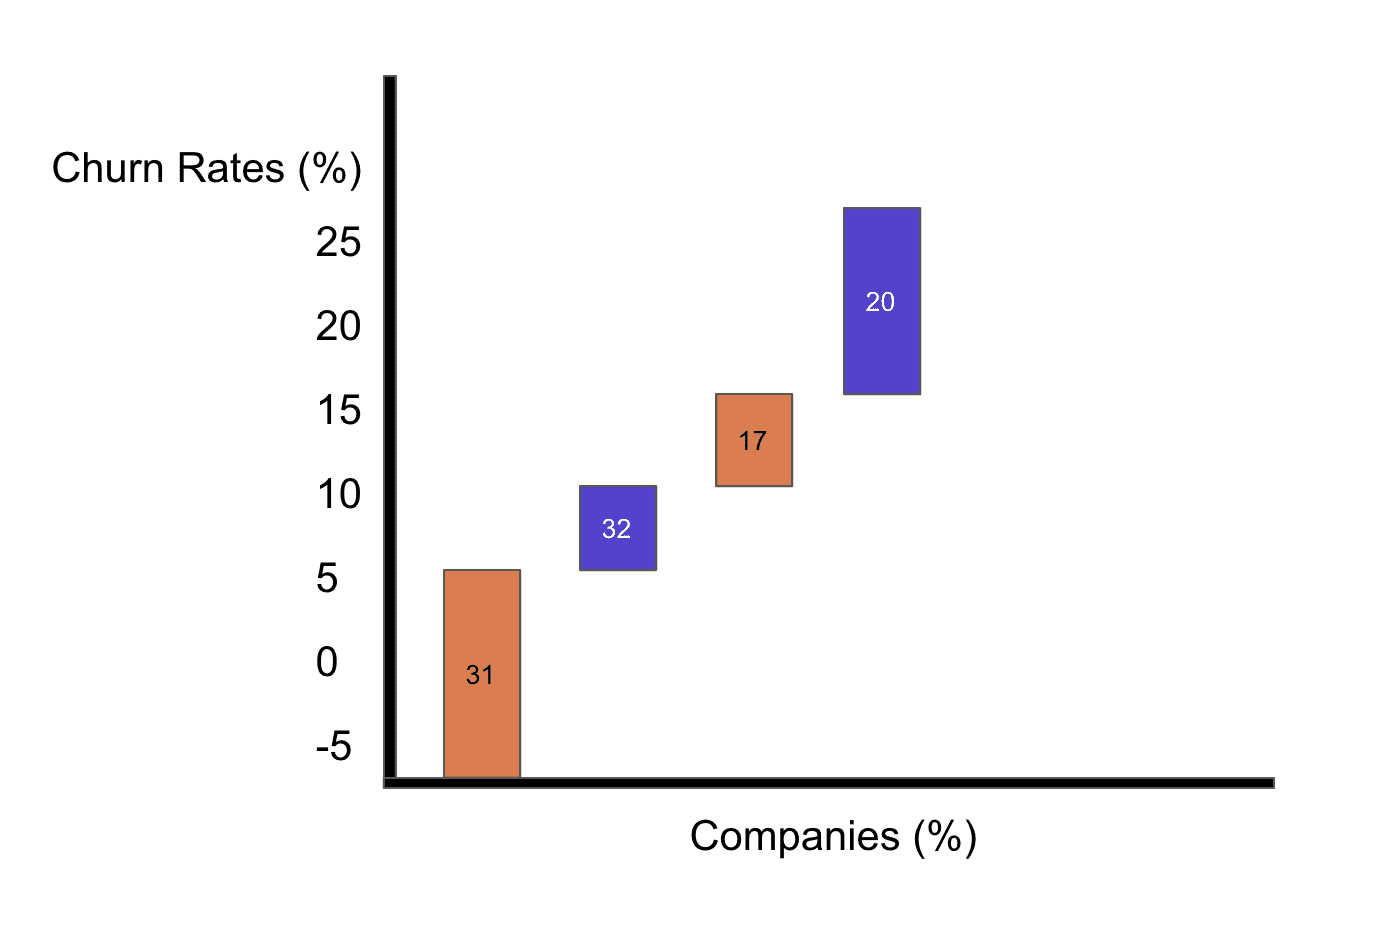 Churn Rates by Different Companies